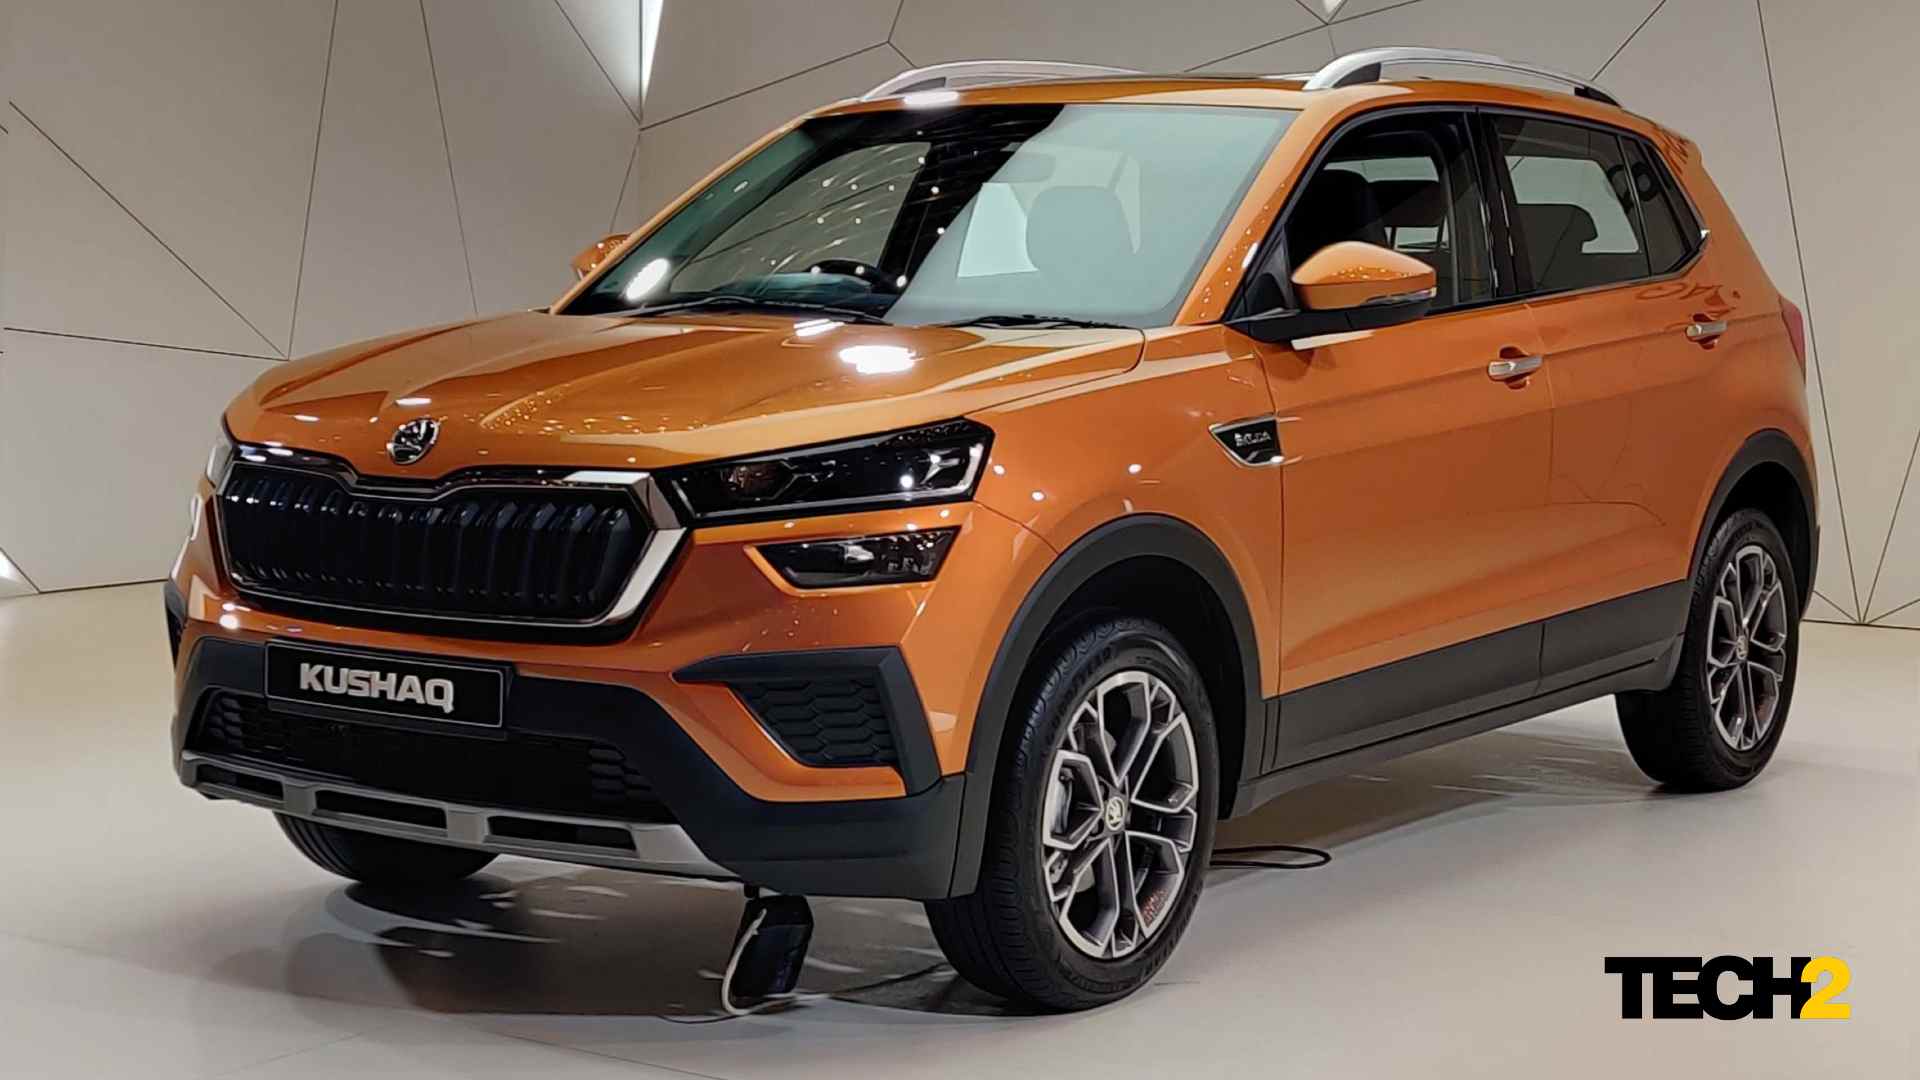  Skoda Kushaq price reveal in June, deliveries of new midsize SUV to commence in July